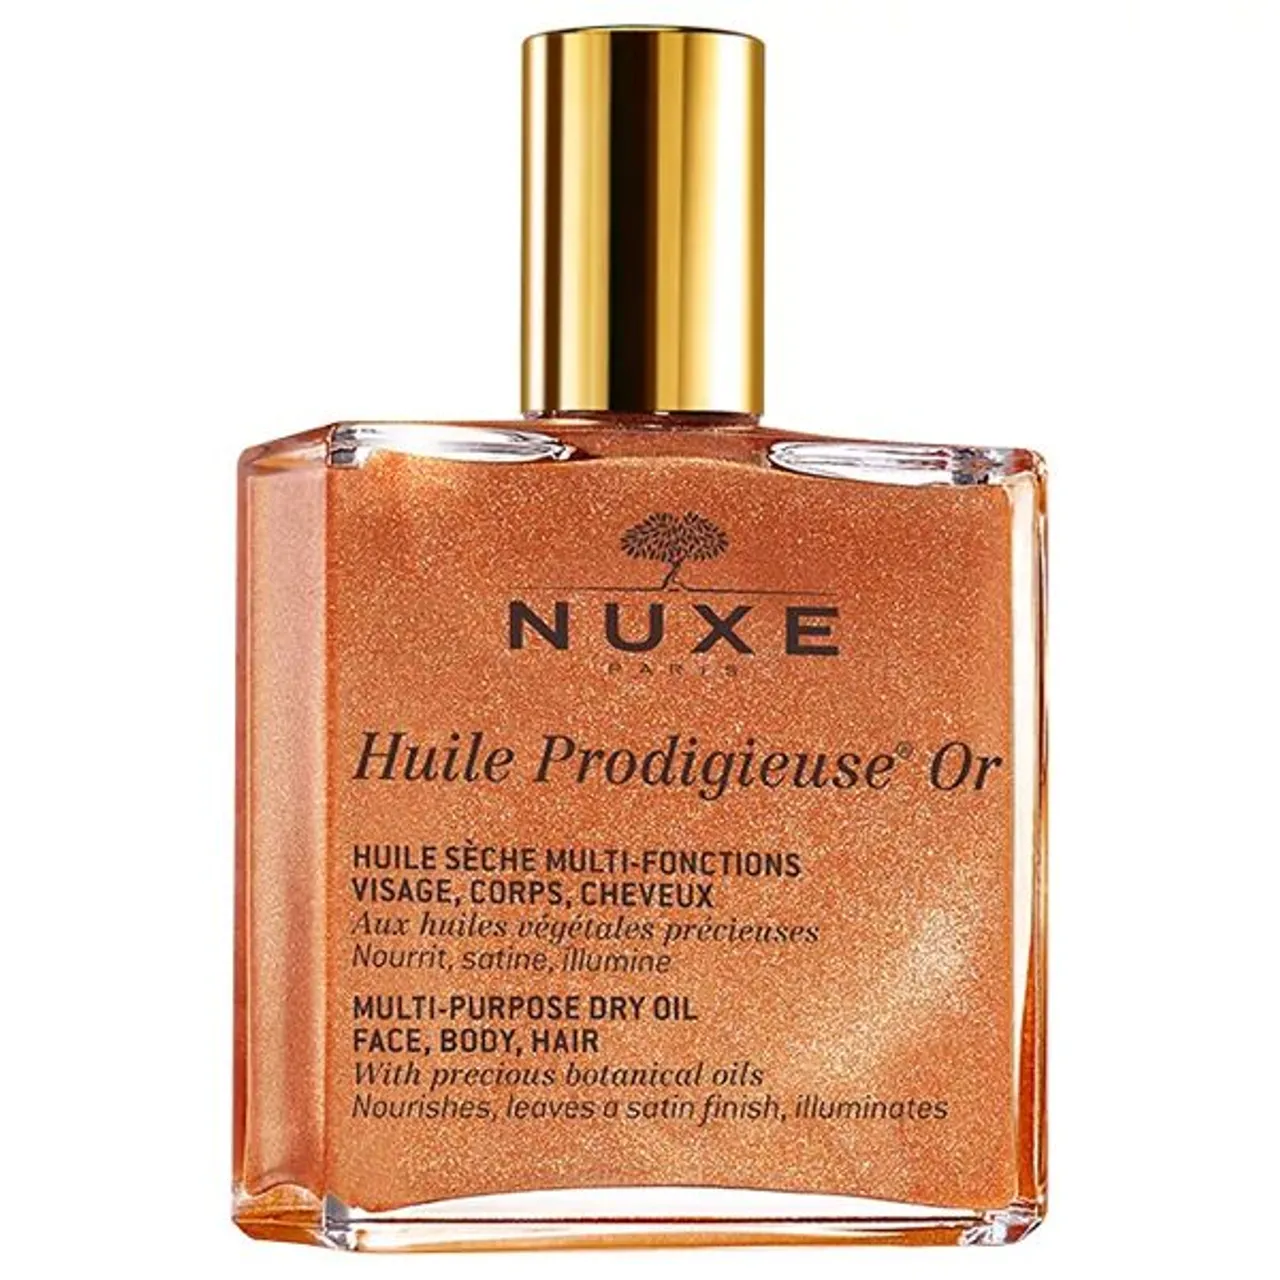 NUXE Huile ProdigieuseÂ® Or Golden Shimmer Multi-Purpose Dry Oil for Face, Body and Hair - Unisex - Size: 50ml